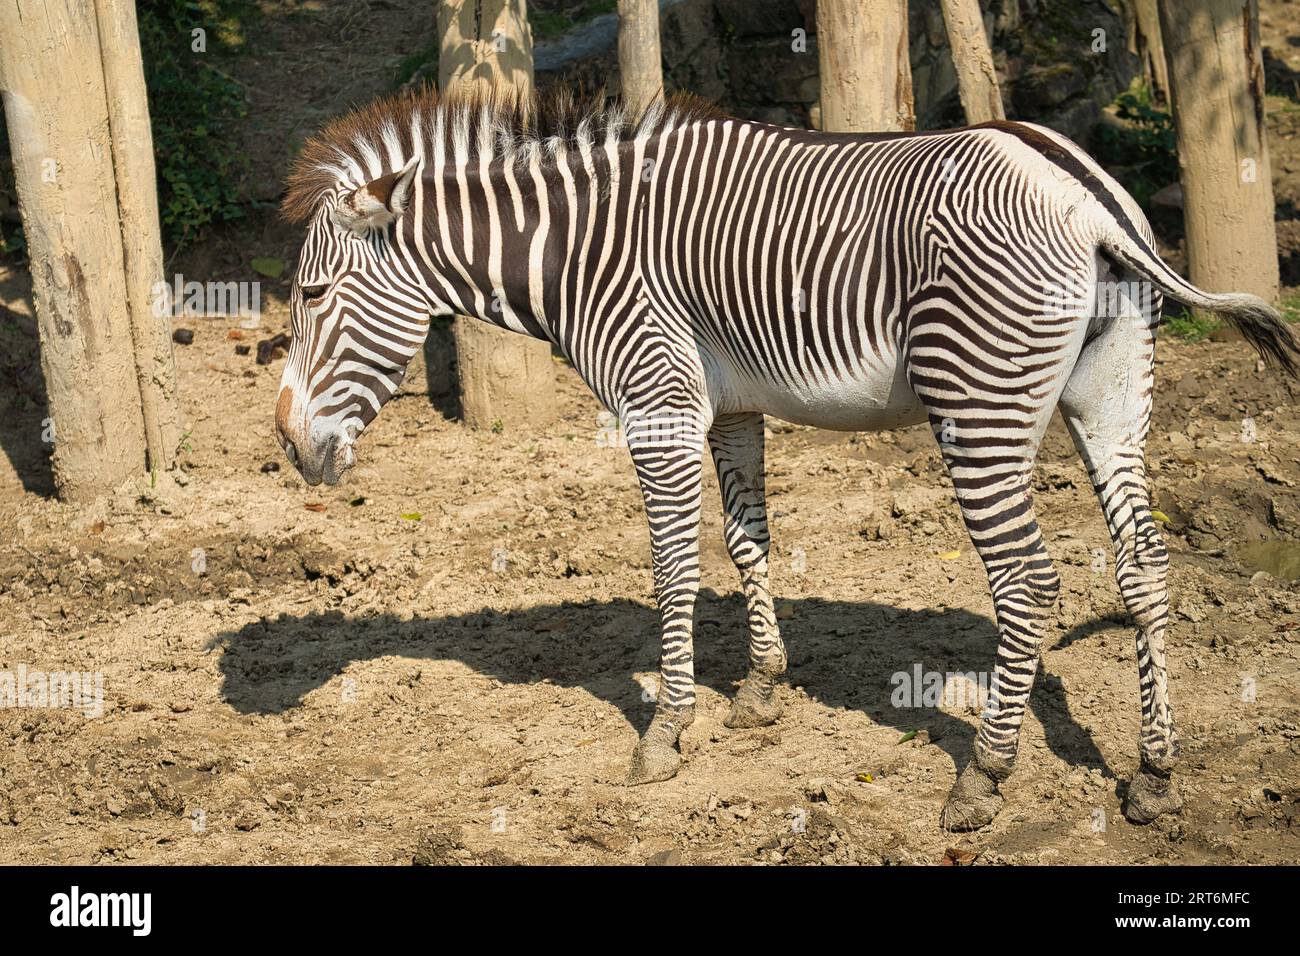 The gravy zebras  in the Paris zoologic park, formerly known as the Bois de Vincennes, 12th arrondissement of Paris, which covers an area of 14.5 hect Stock Photo